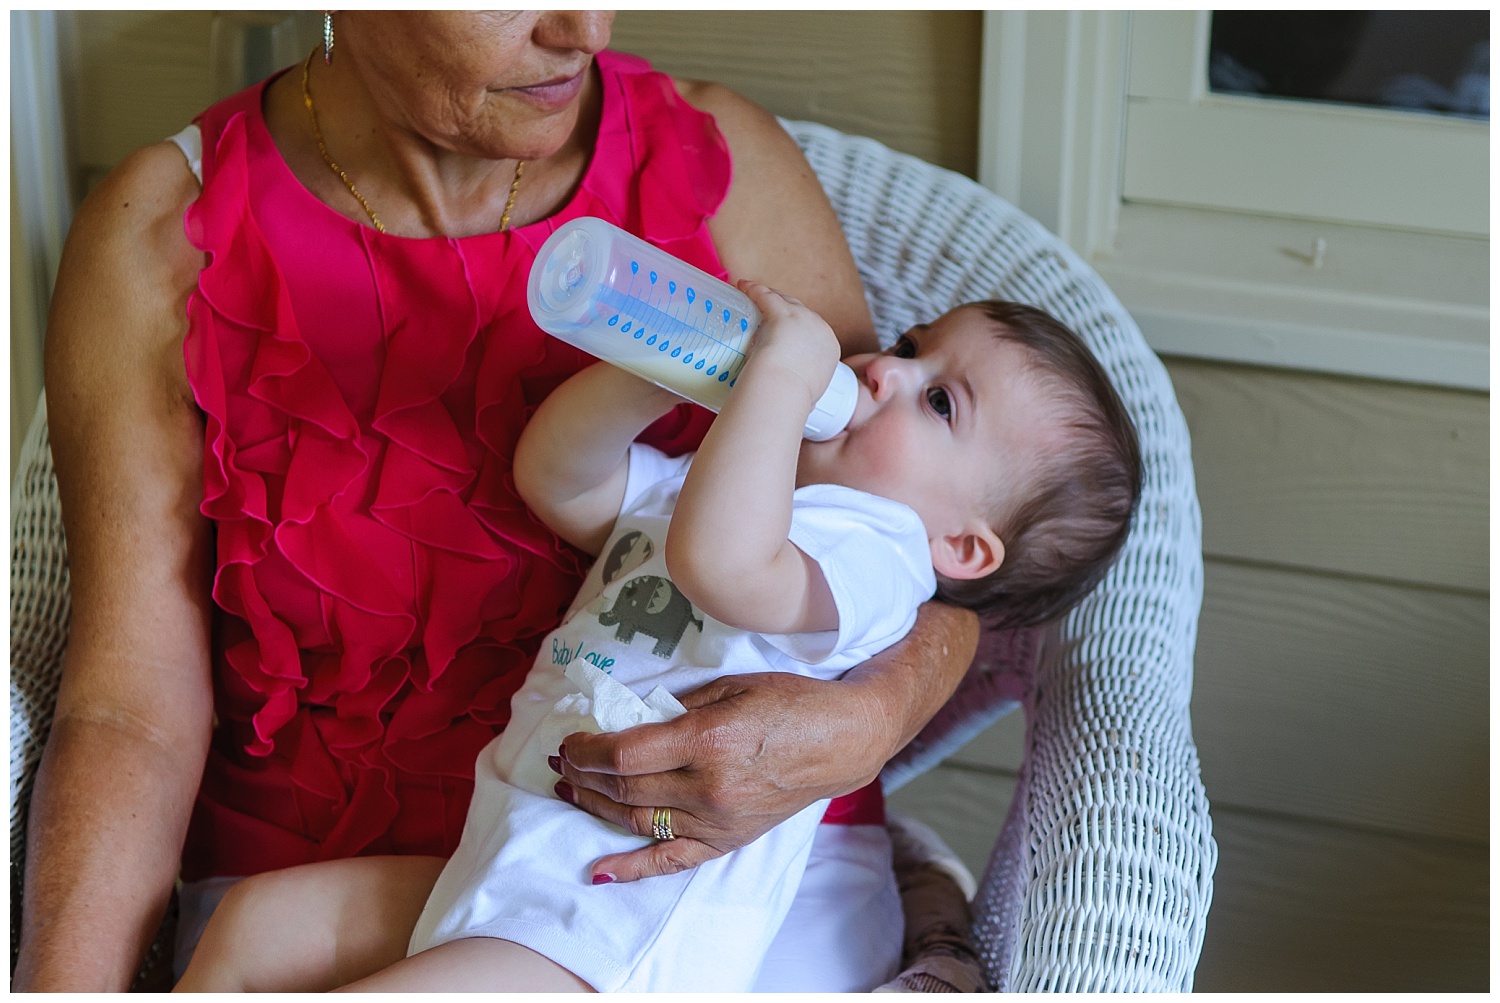 this is an image of the child drinking a bottle and being held by his grandmother. the image was taken at the child's first birthday party in marietta, georgia.